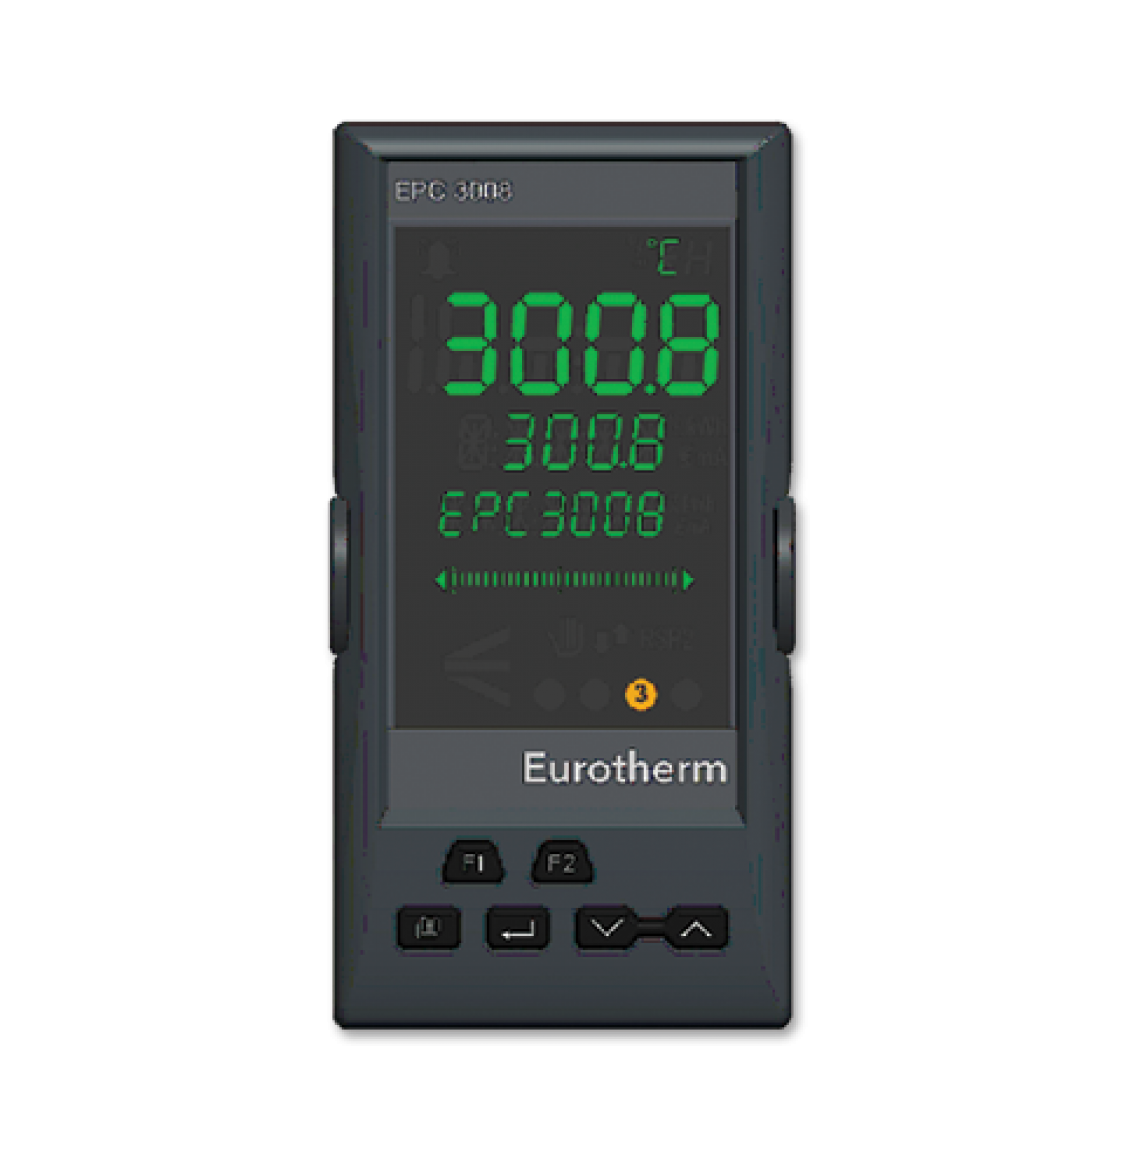 Eurotherm EPC3008 precision controllers